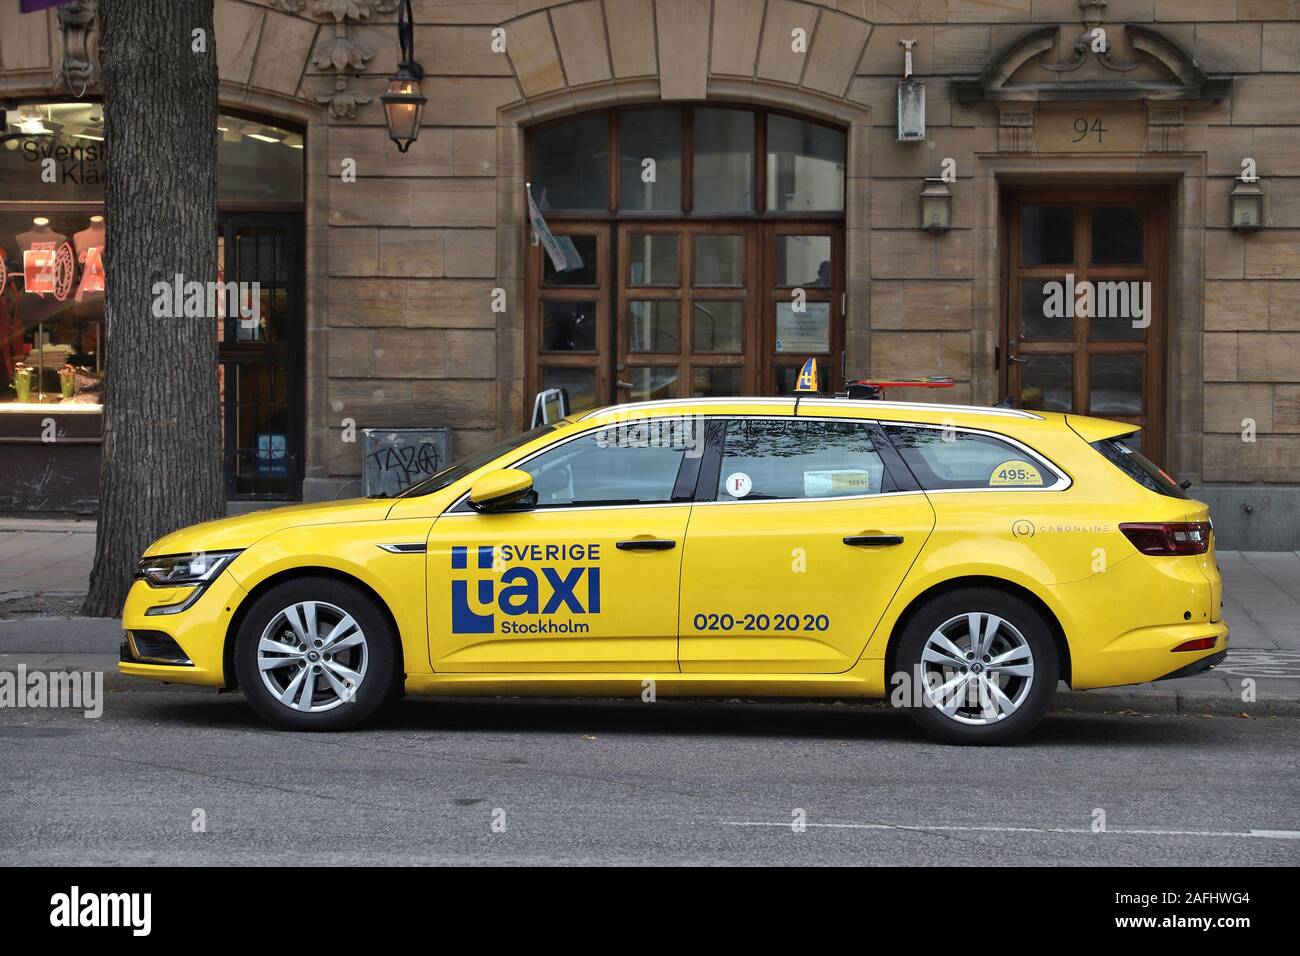 STOCKHOLM, SWEDEN - AUGUST 22, 2018: Yellow Renault Talisman taxi cab in Stockholm. Taxi service market in Sweden is relatively liberal. Stock Photo